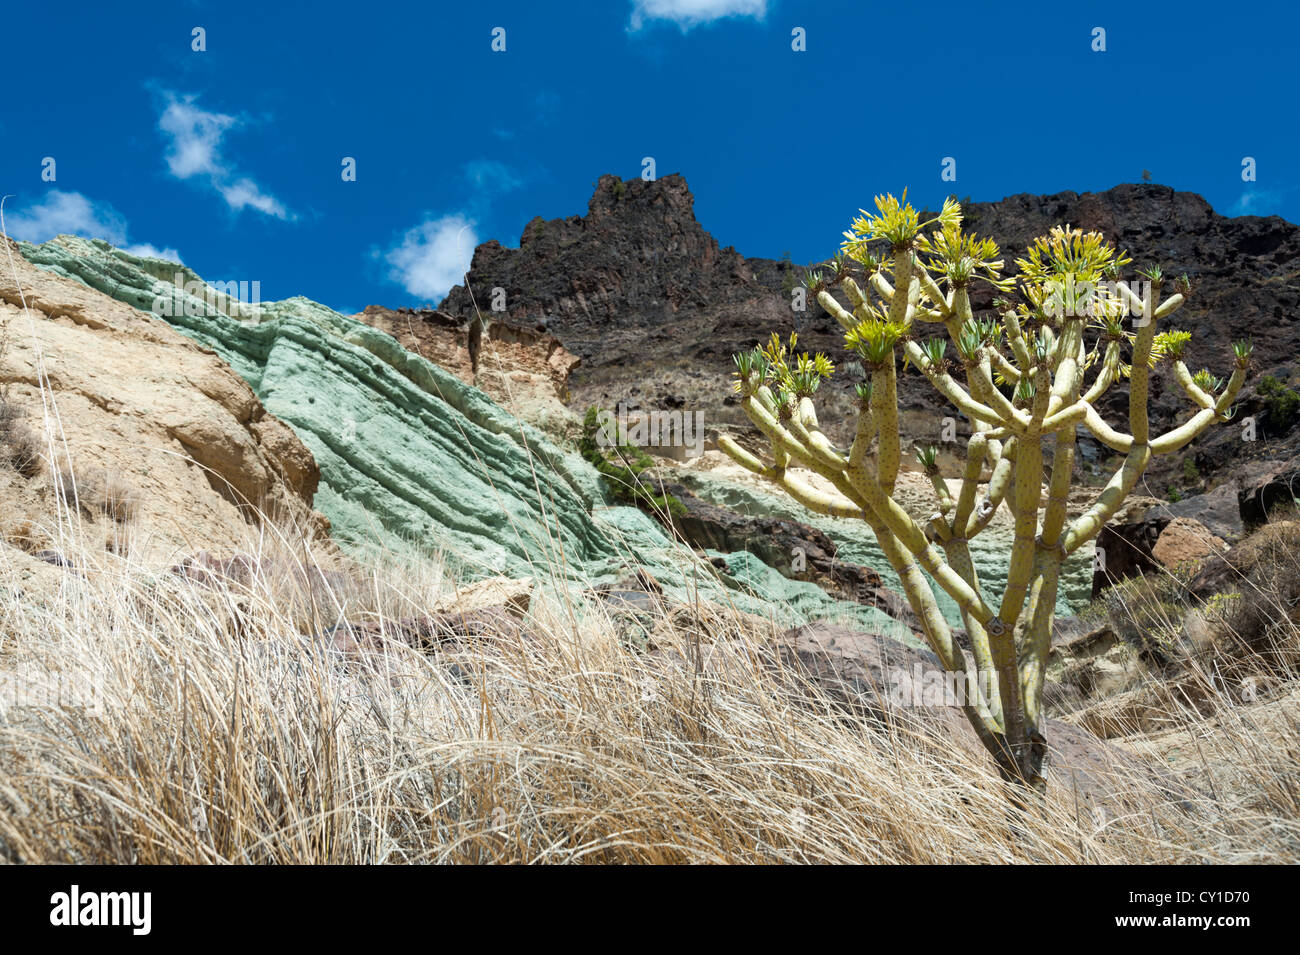 Coloured volcanic rocks at Fuente Los Azulejos, Gran Canaria, Canary Islands Spain, a popular tourist spot Stock Photo